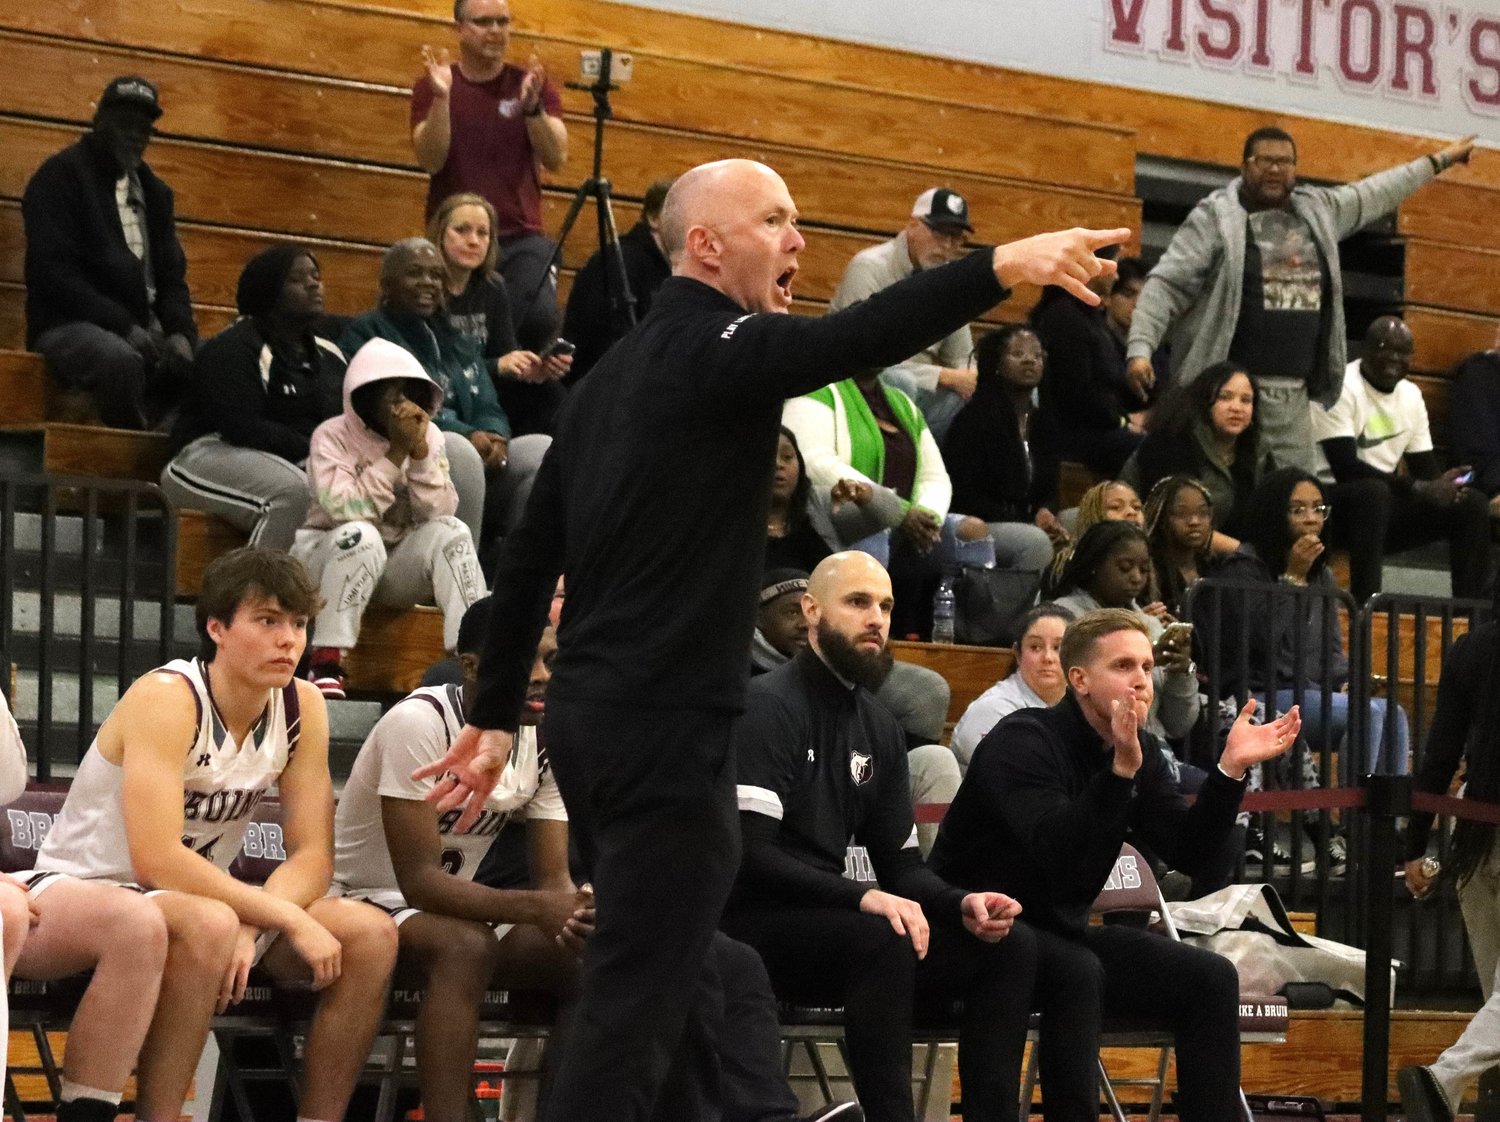 Broadneck’s head coach, John Williams, was enthusiastic as he watched his team go on a 20-4 run in the third quarter to pull away from Meade.